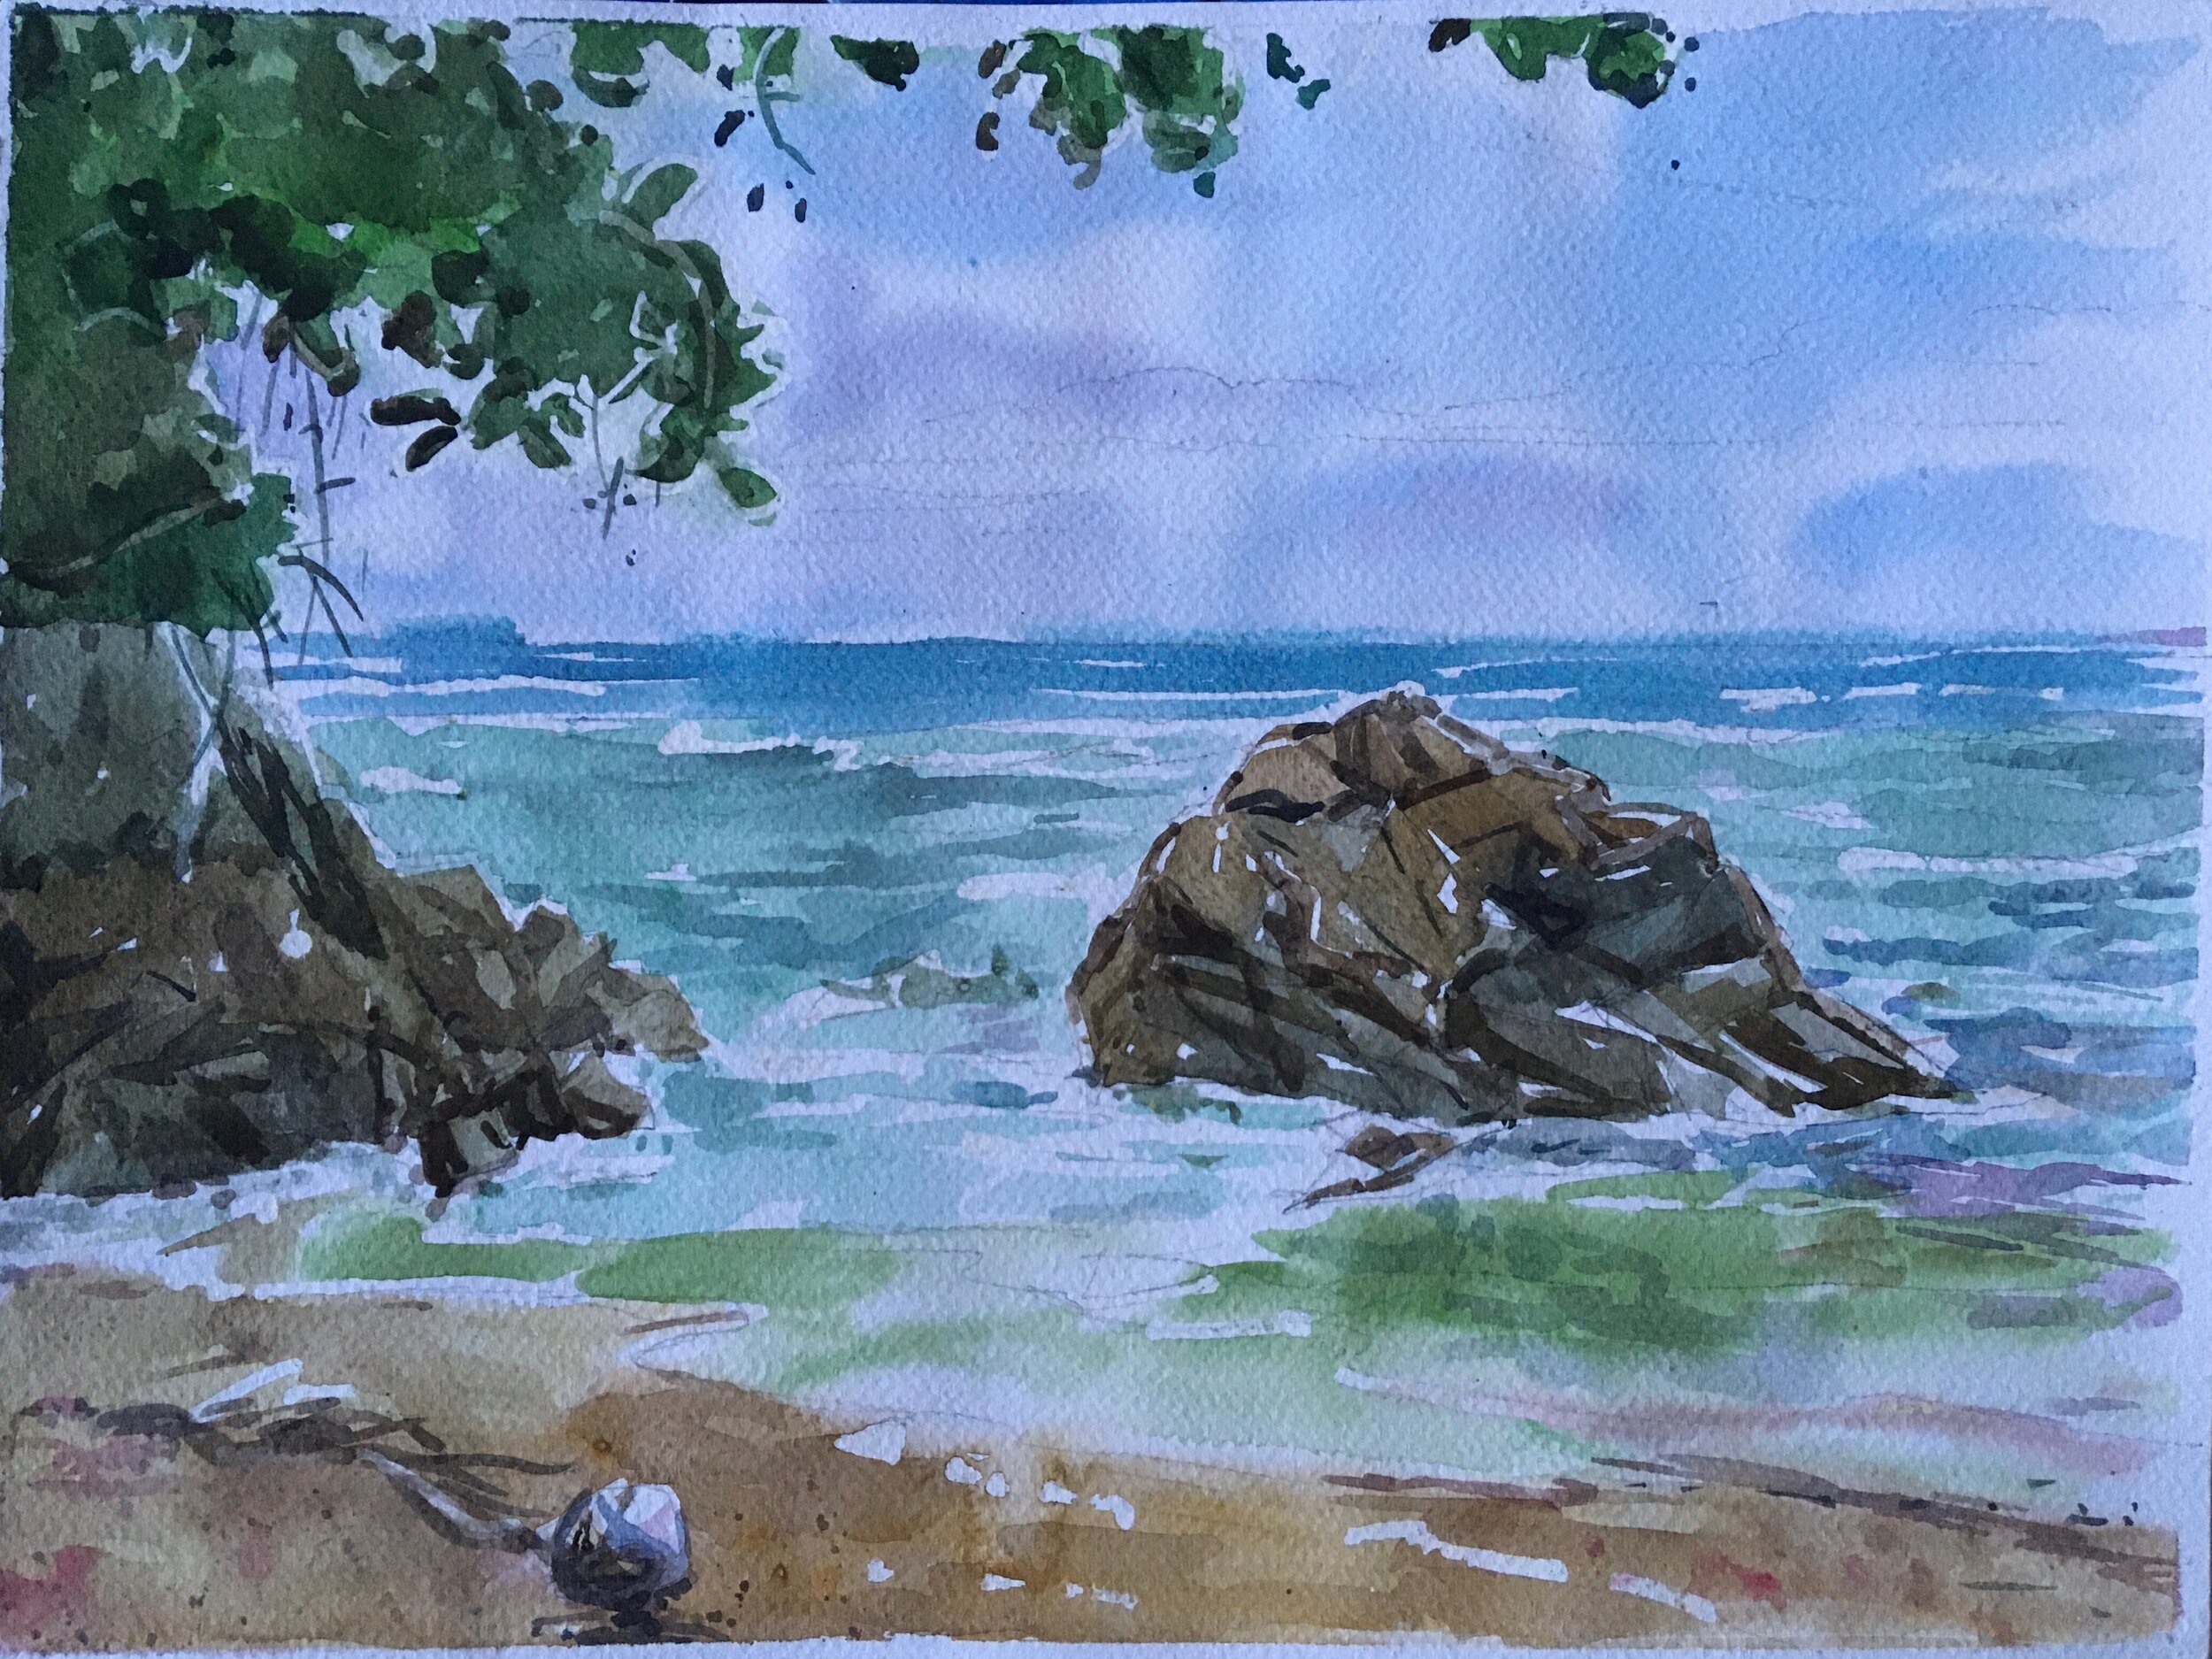  North Coast Blanchisseuse 12”x16” Water colour 